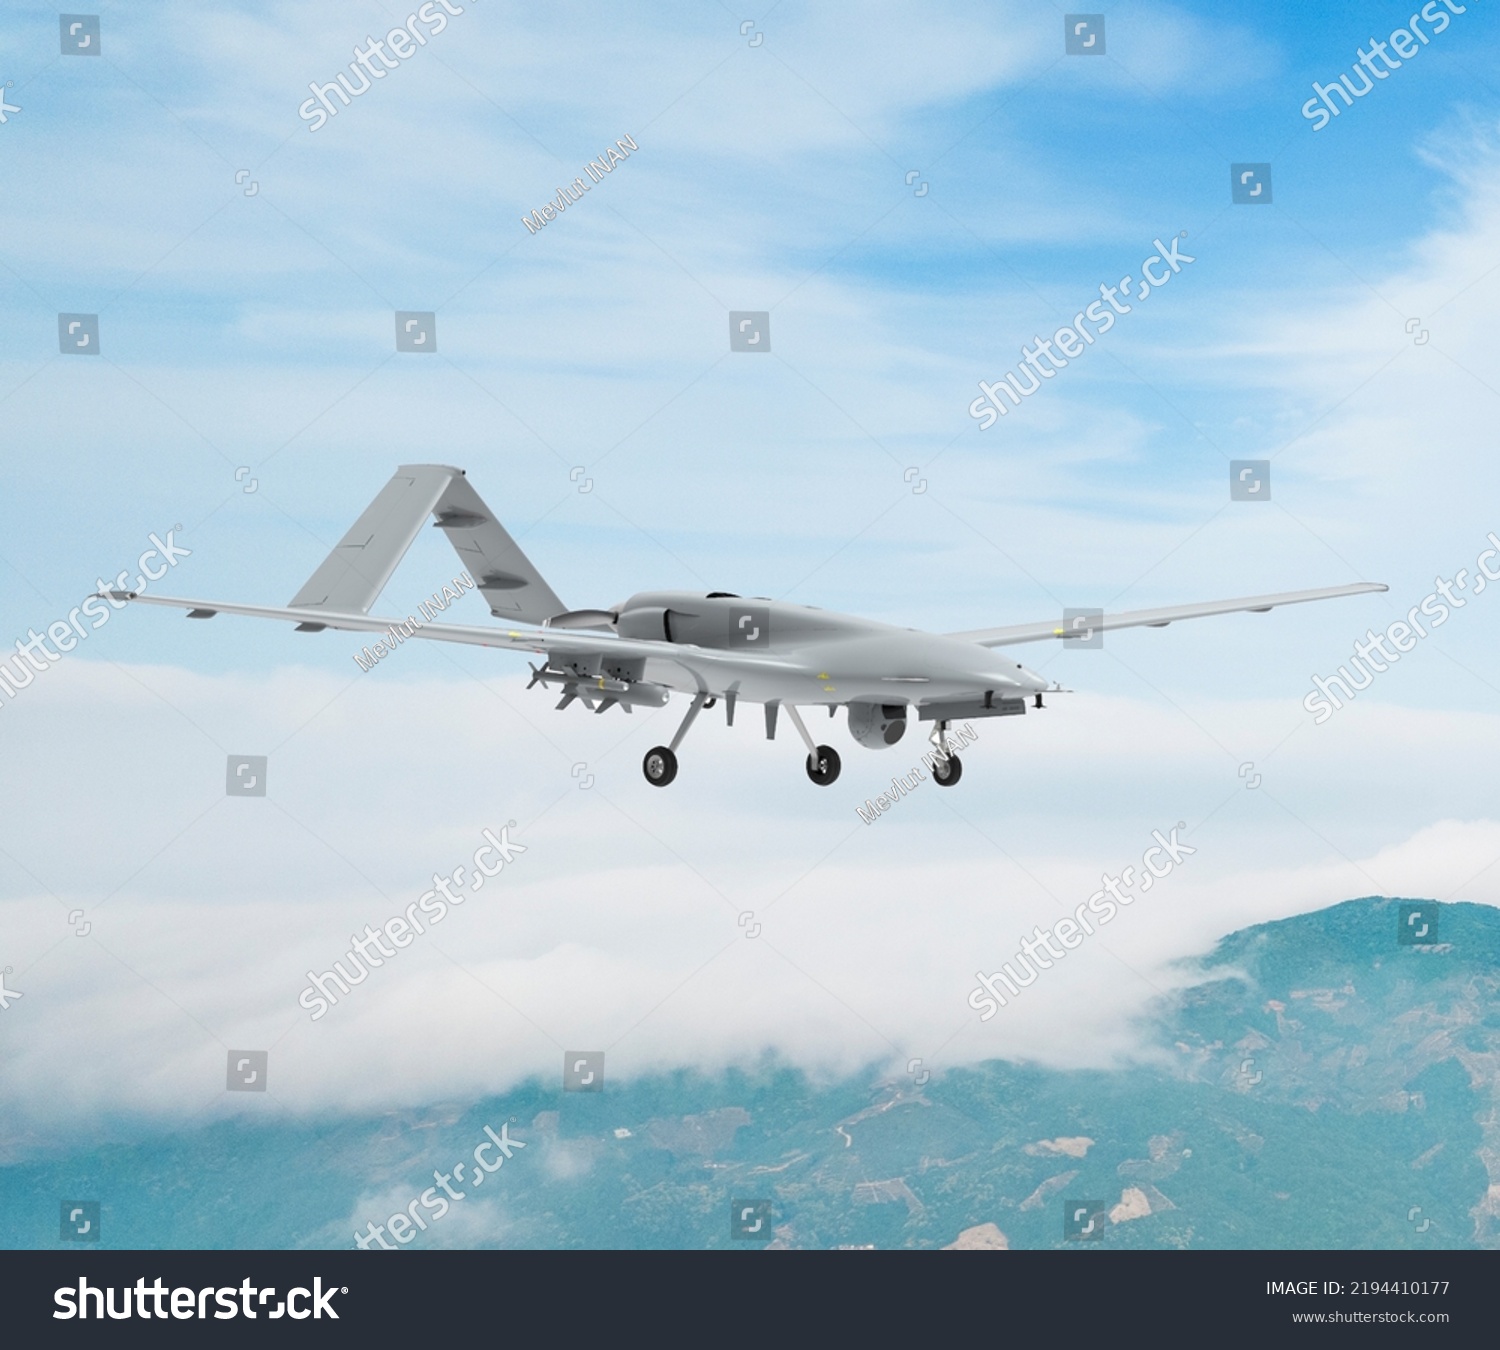 Bayraktar TB2 Unmanned aerial vehicle gliding through the clouds. Bayraktar TB2 combat drone in flight over the clouds. #2194410177